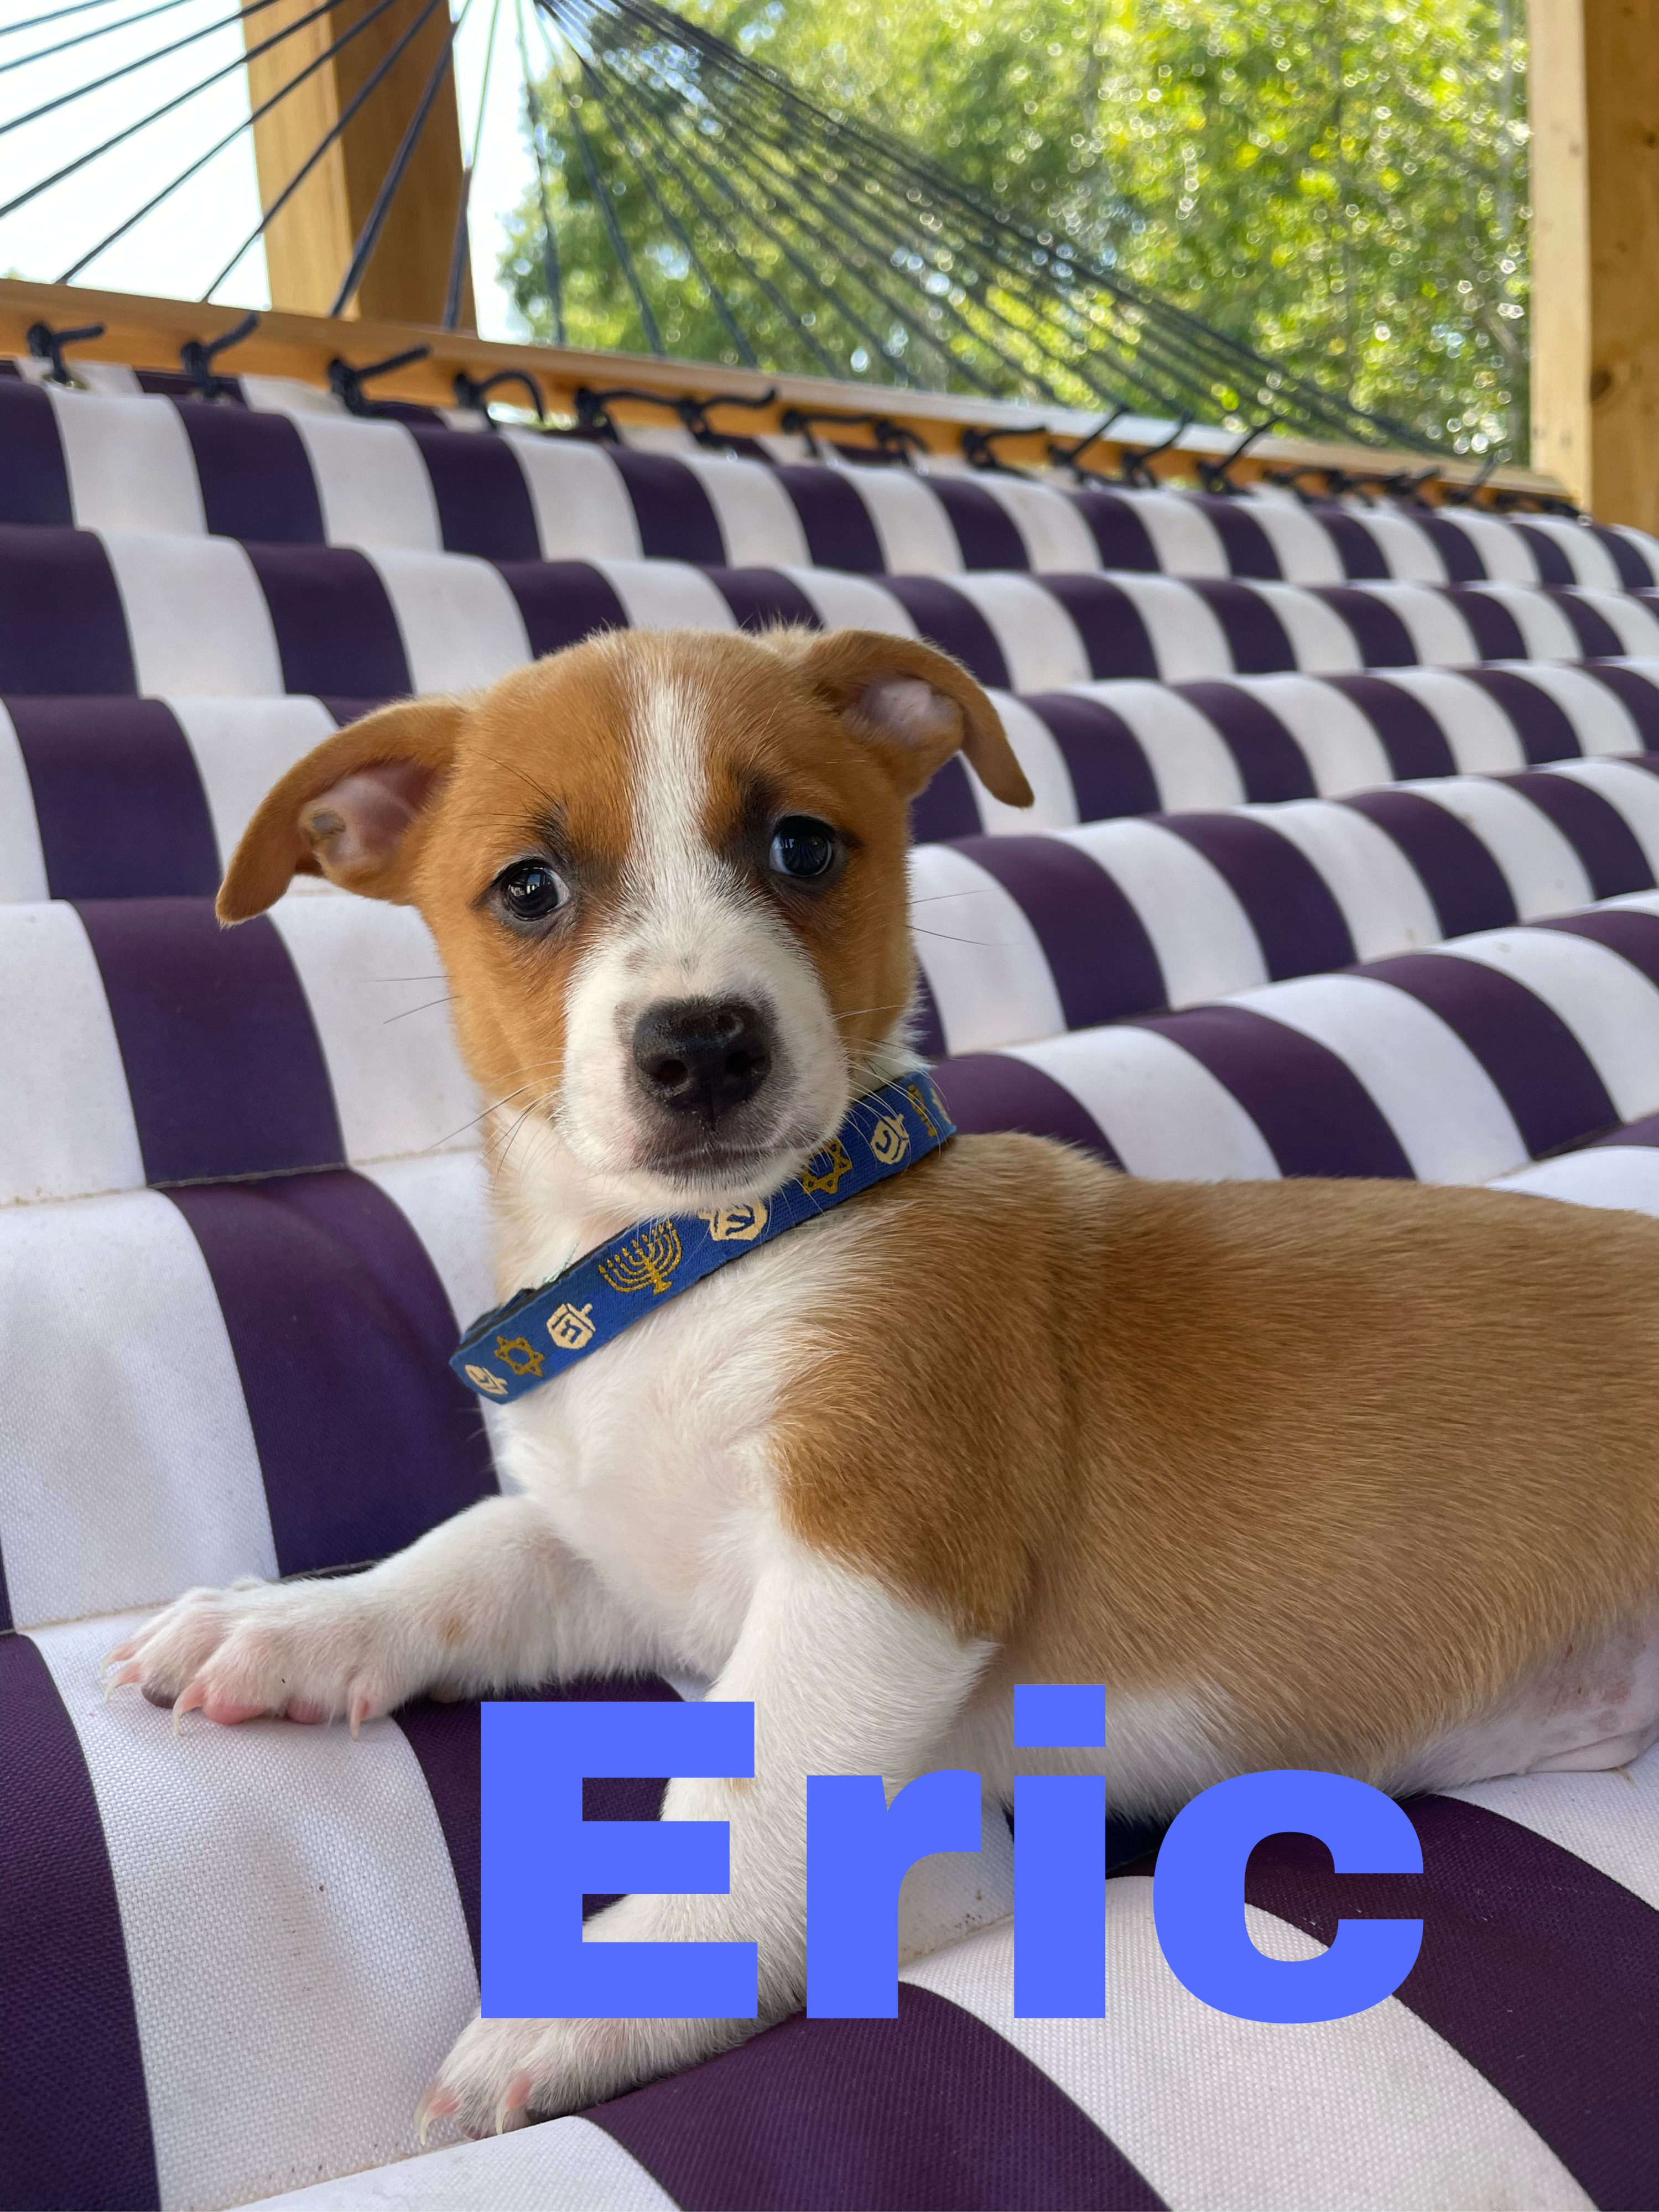 Eric Event Saturday 1 4 Premier Pet Supply 13 Mile Southfield Rd detail page